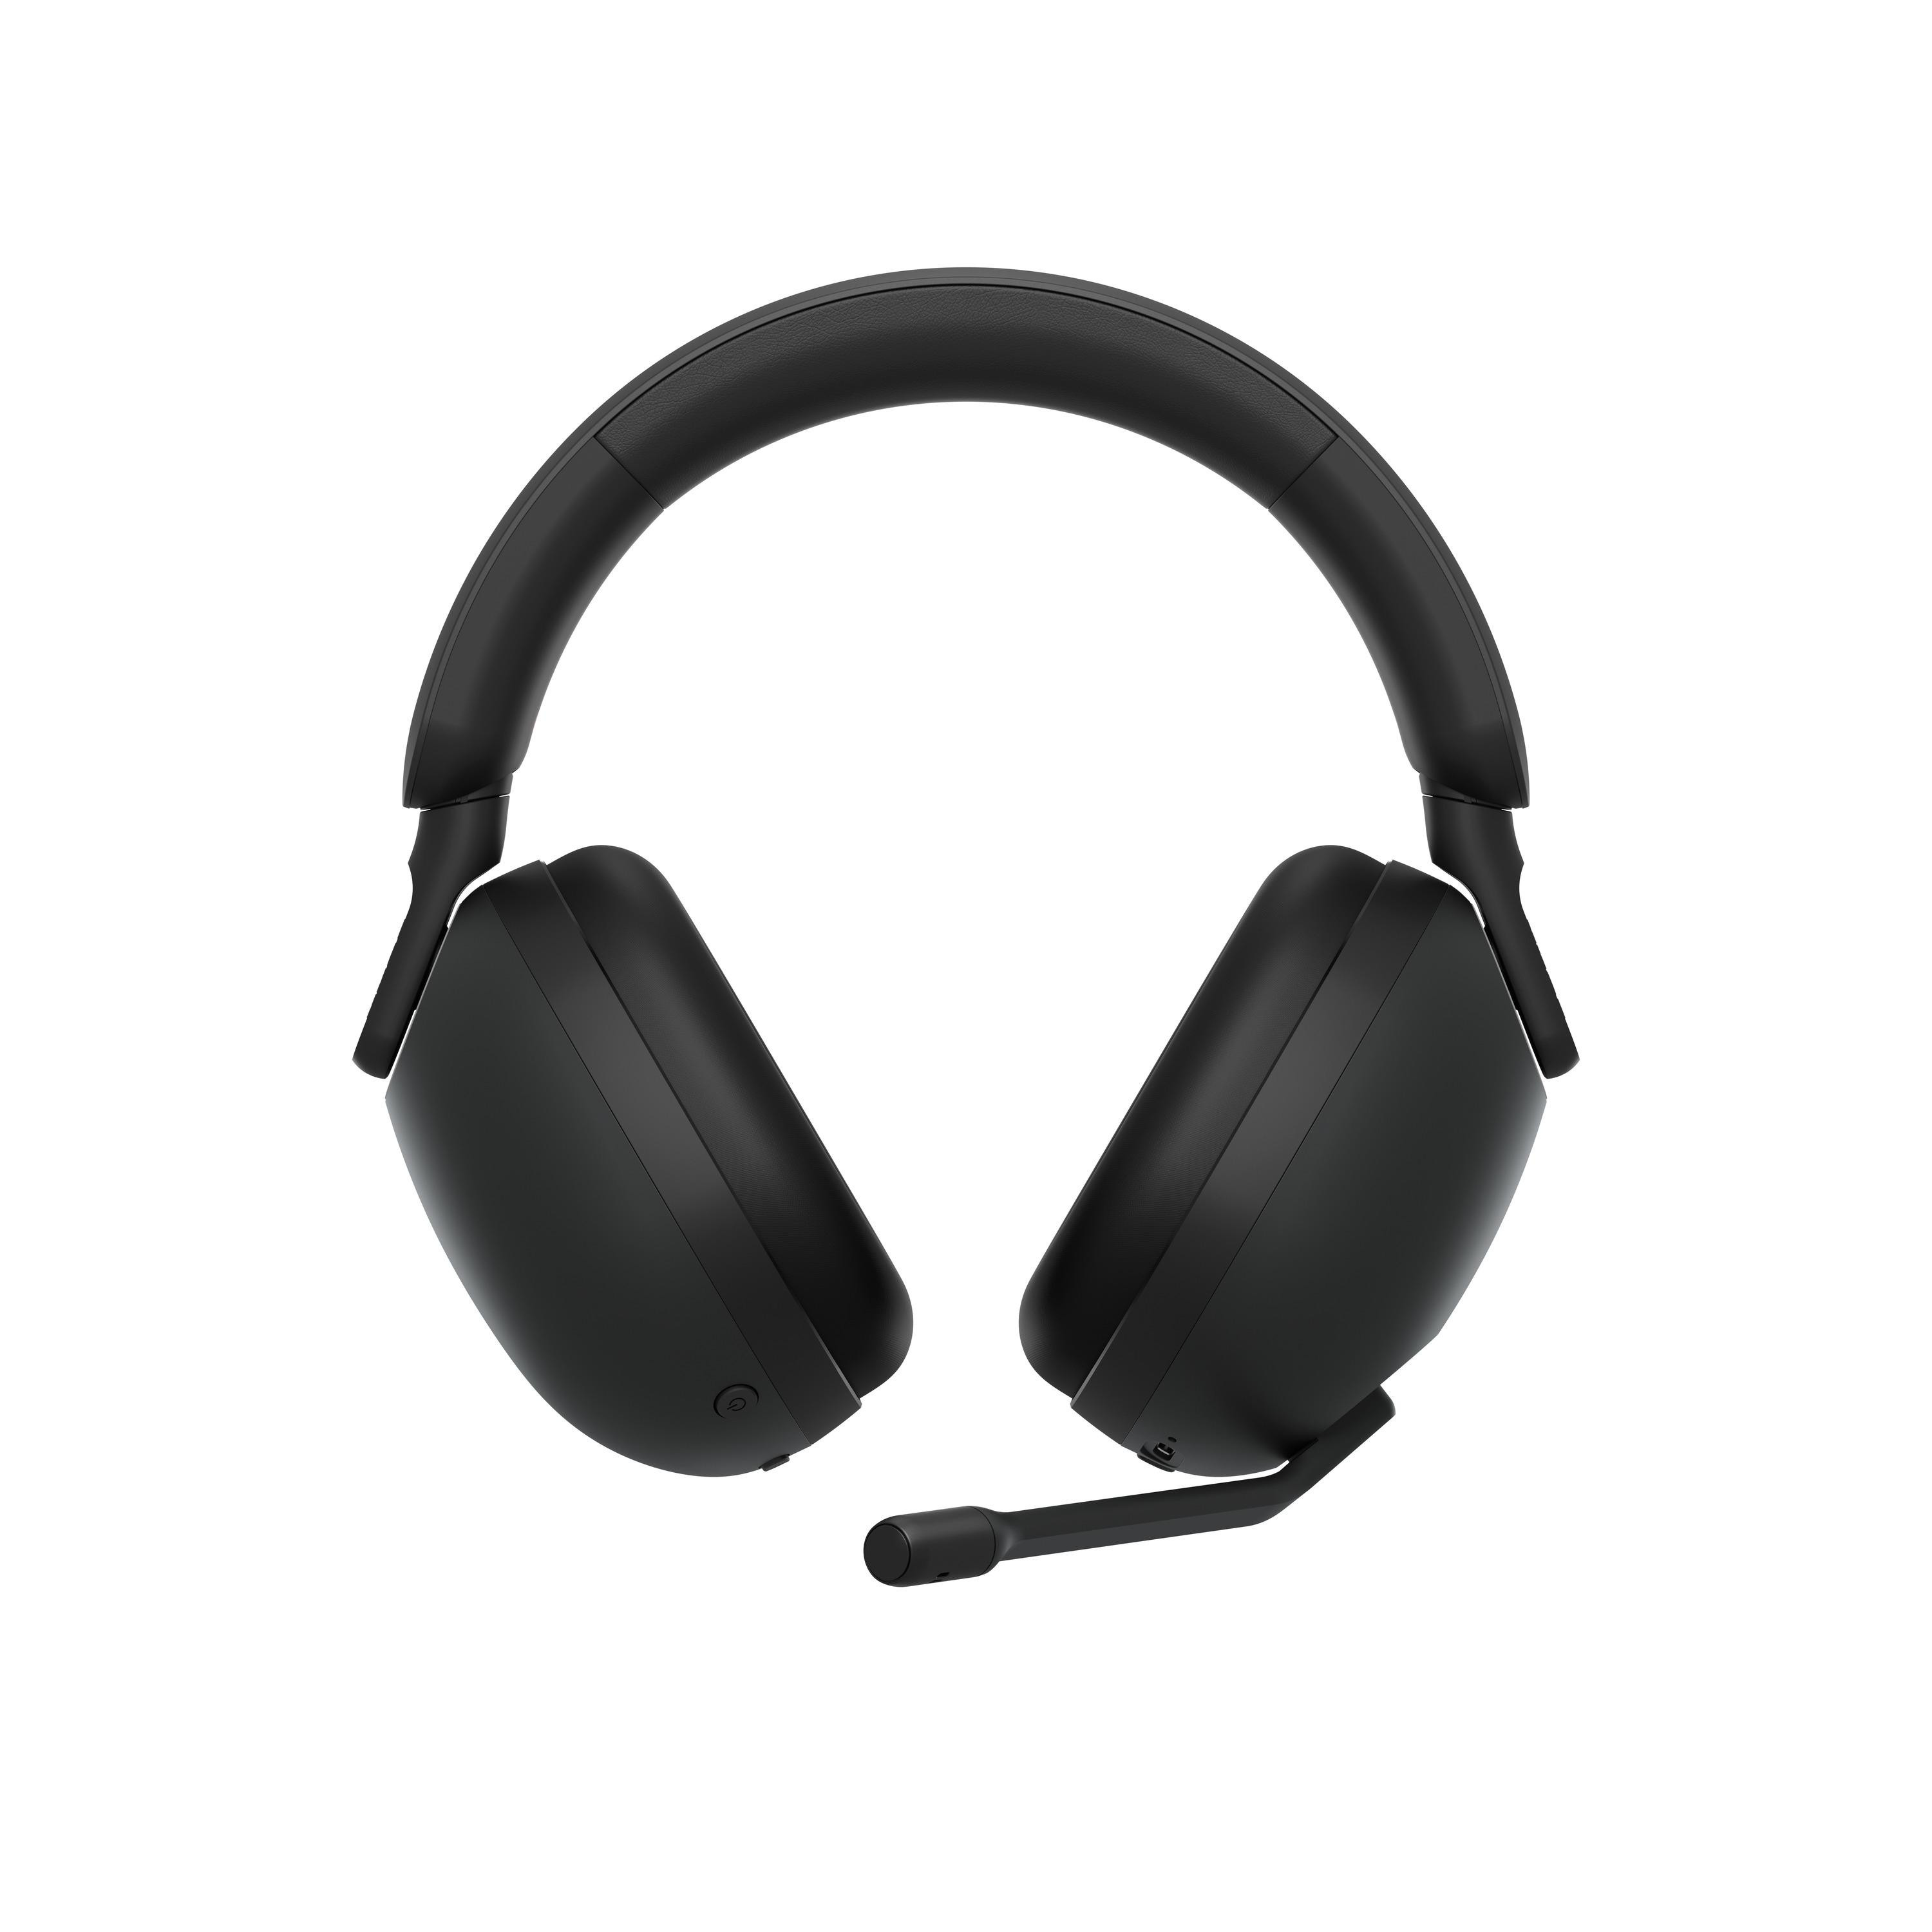 H9, WH-G900N Over-ear Schwarz Headset INZONE SONY Gaming Bluetooth